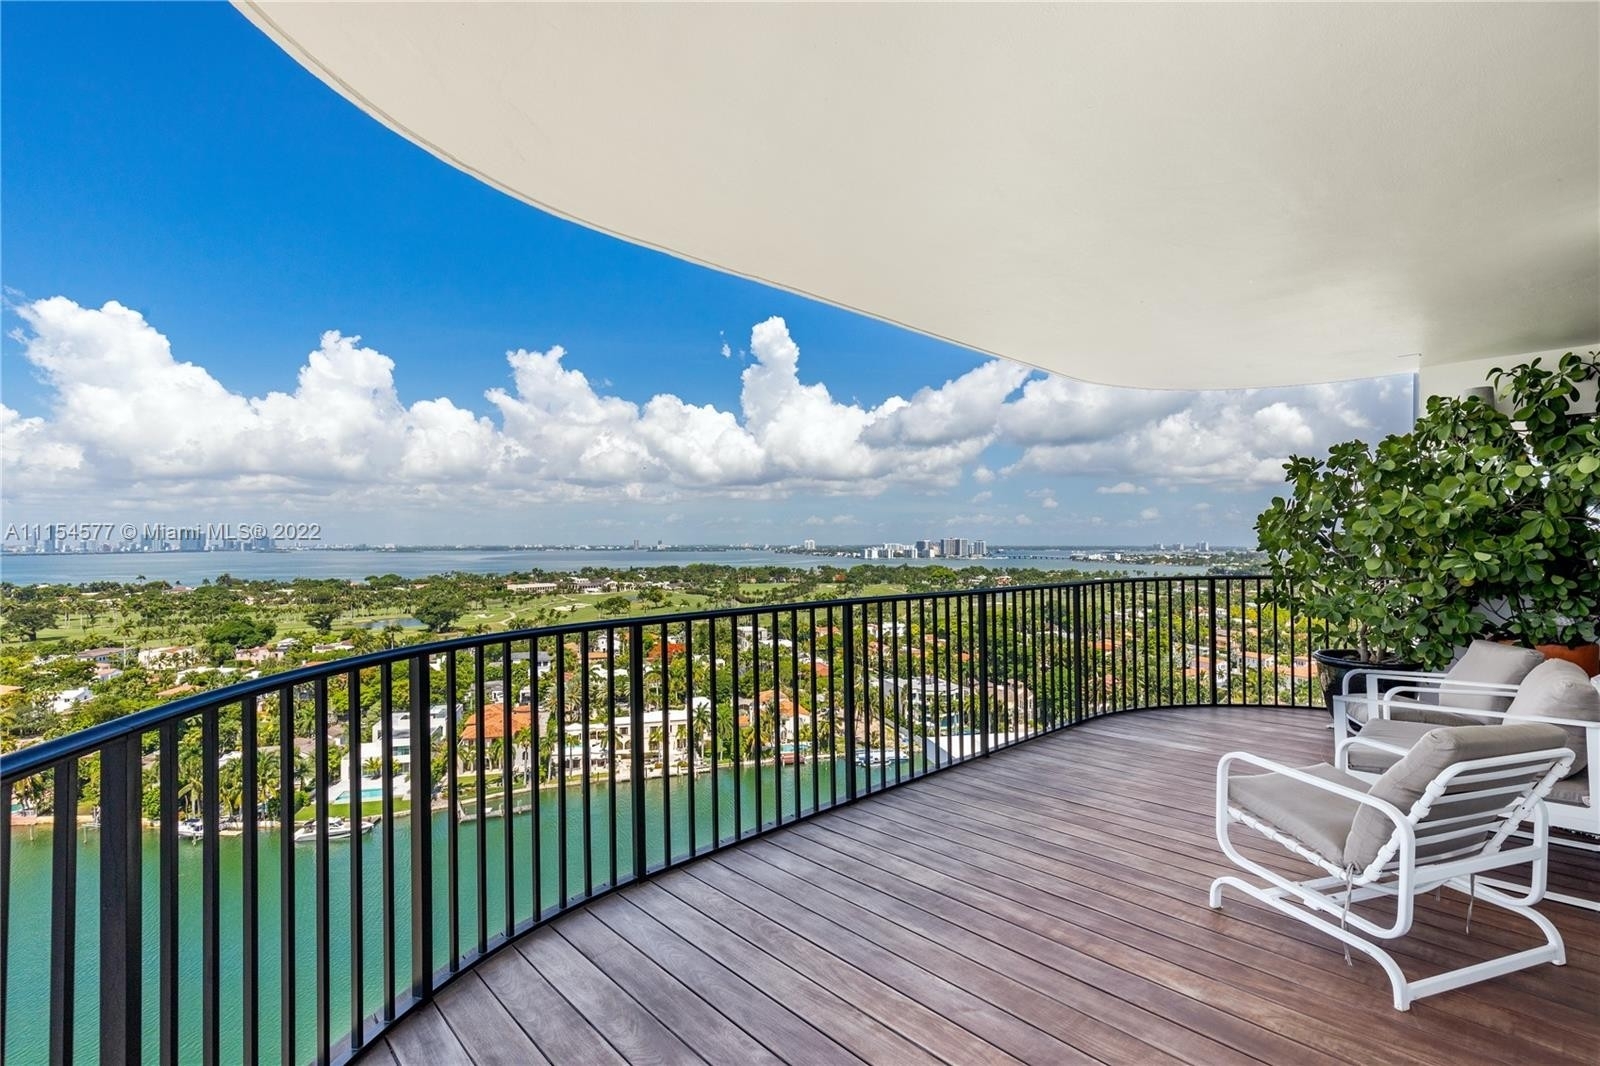 Property at 5660 Collins Ave , 20A Miami Beach